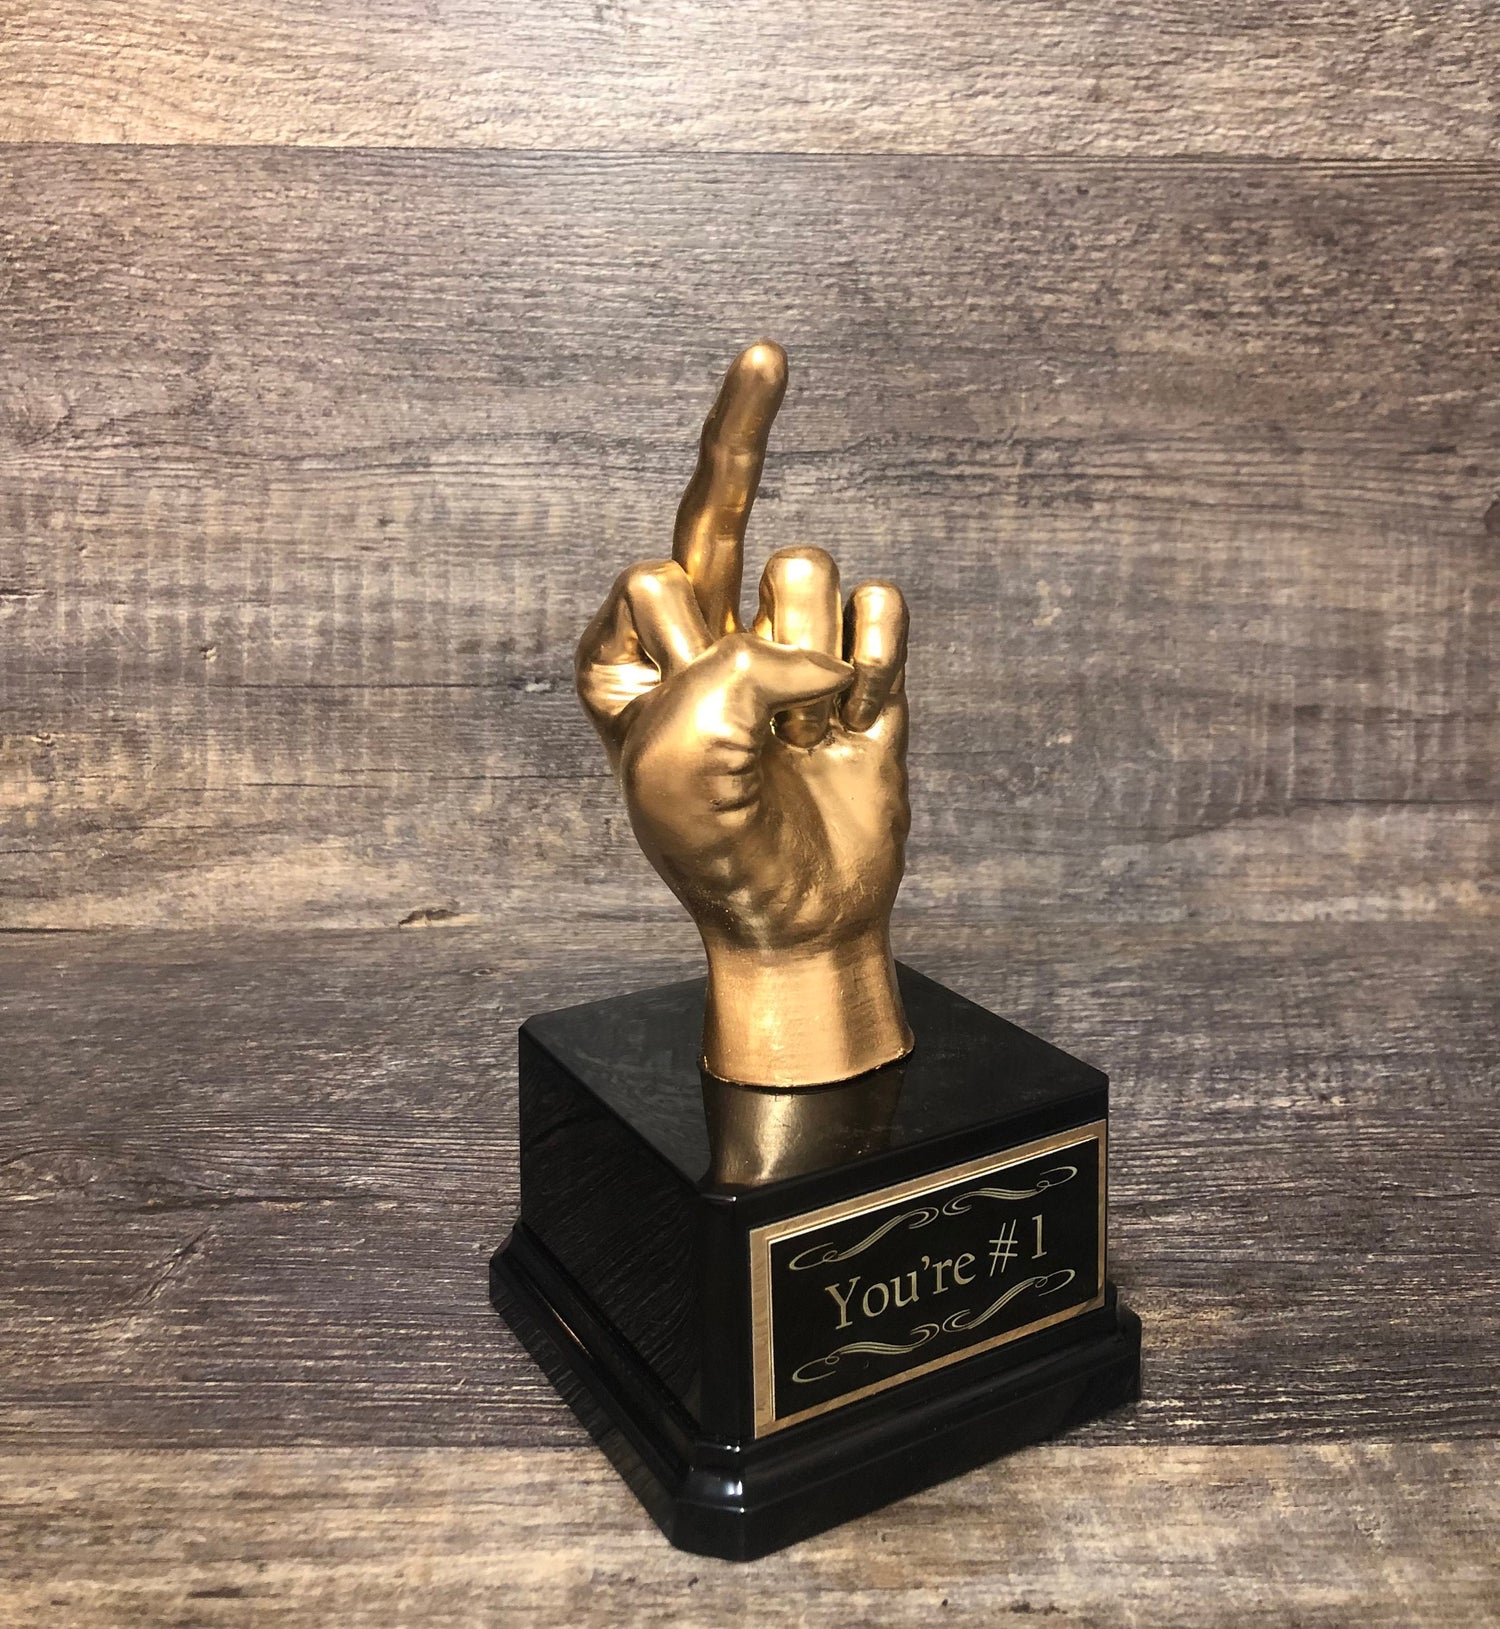 Funny Trophy You're #1 Middle Finger Gag Gift Adult Humor Retirement Gift Funny Achievement Award Flipping You The Bird One Finger Two Words